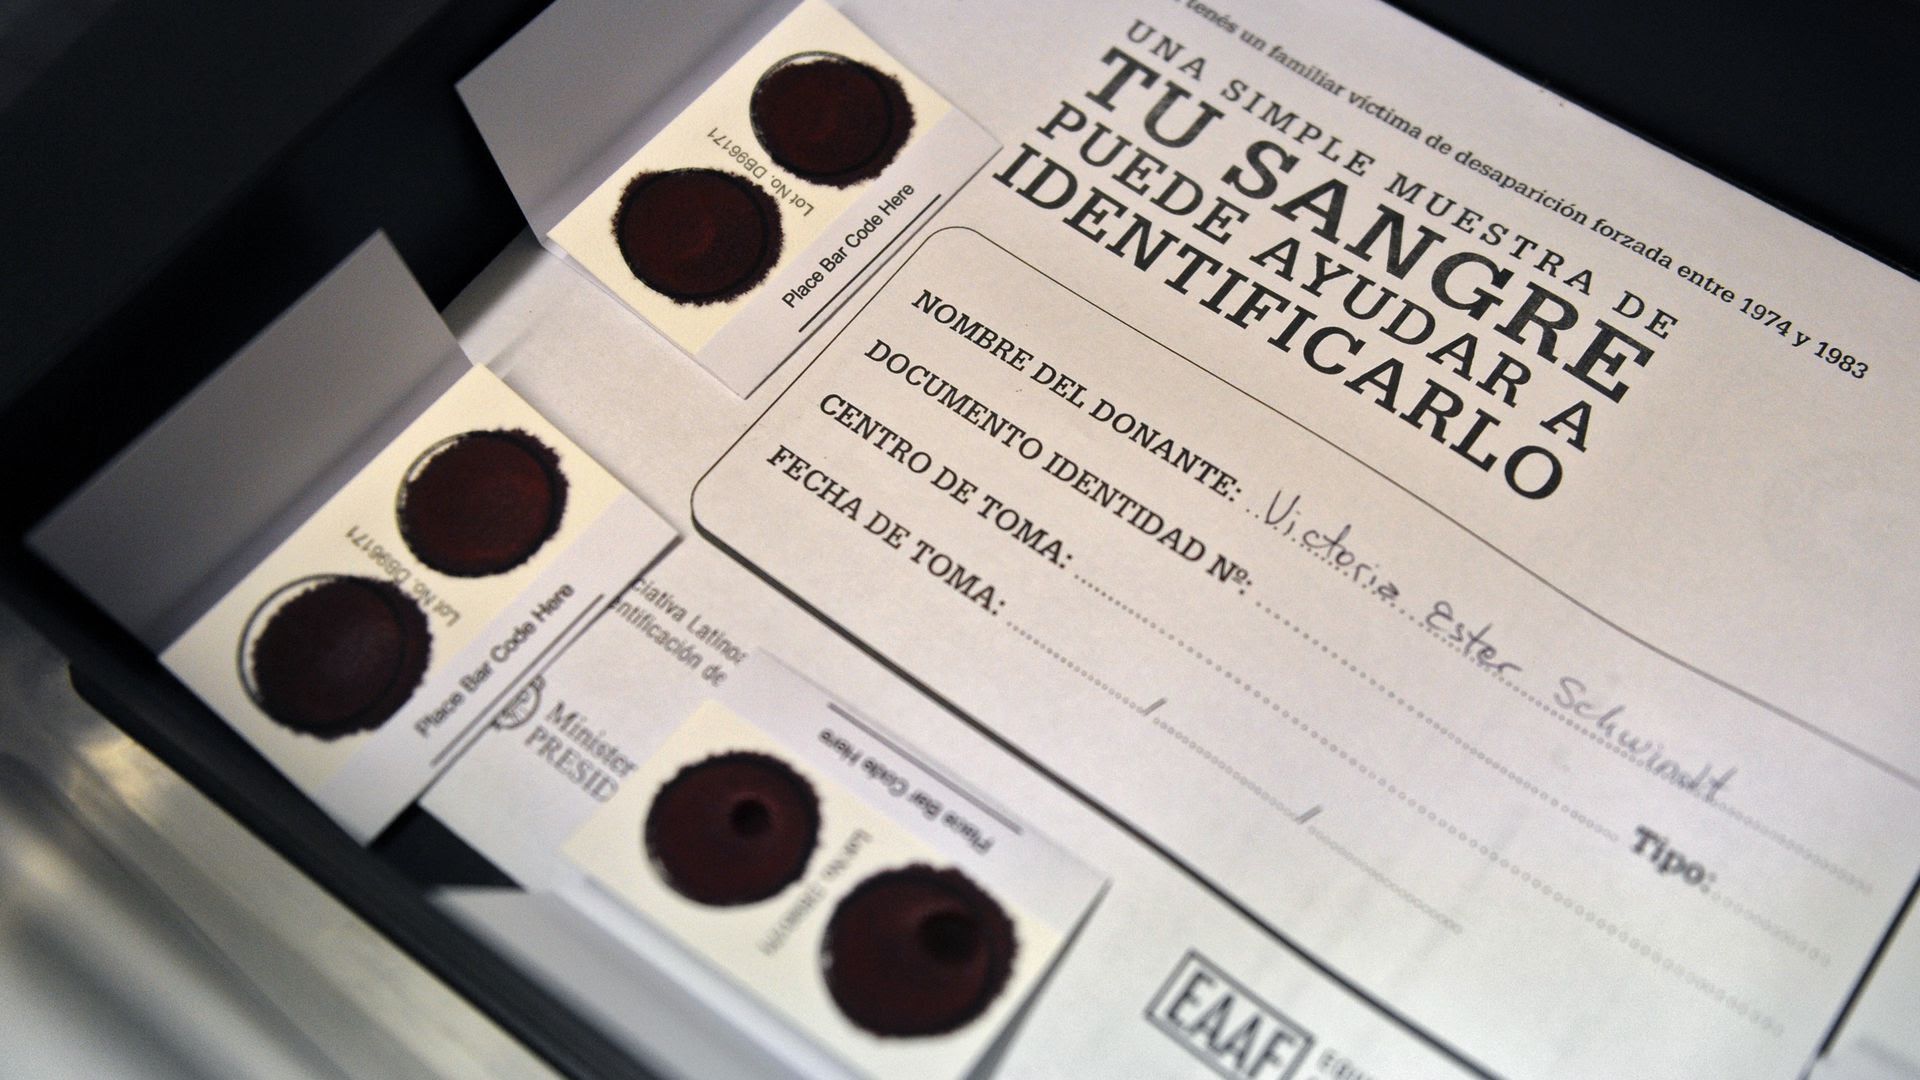 An intake sample kit for the campaign to collect DNA samples, which is being promoted with the hashtag #ArgentinaTeBusca (Argentina is looking for you). Photo: Juan Mabromata/AFP via Getty Images